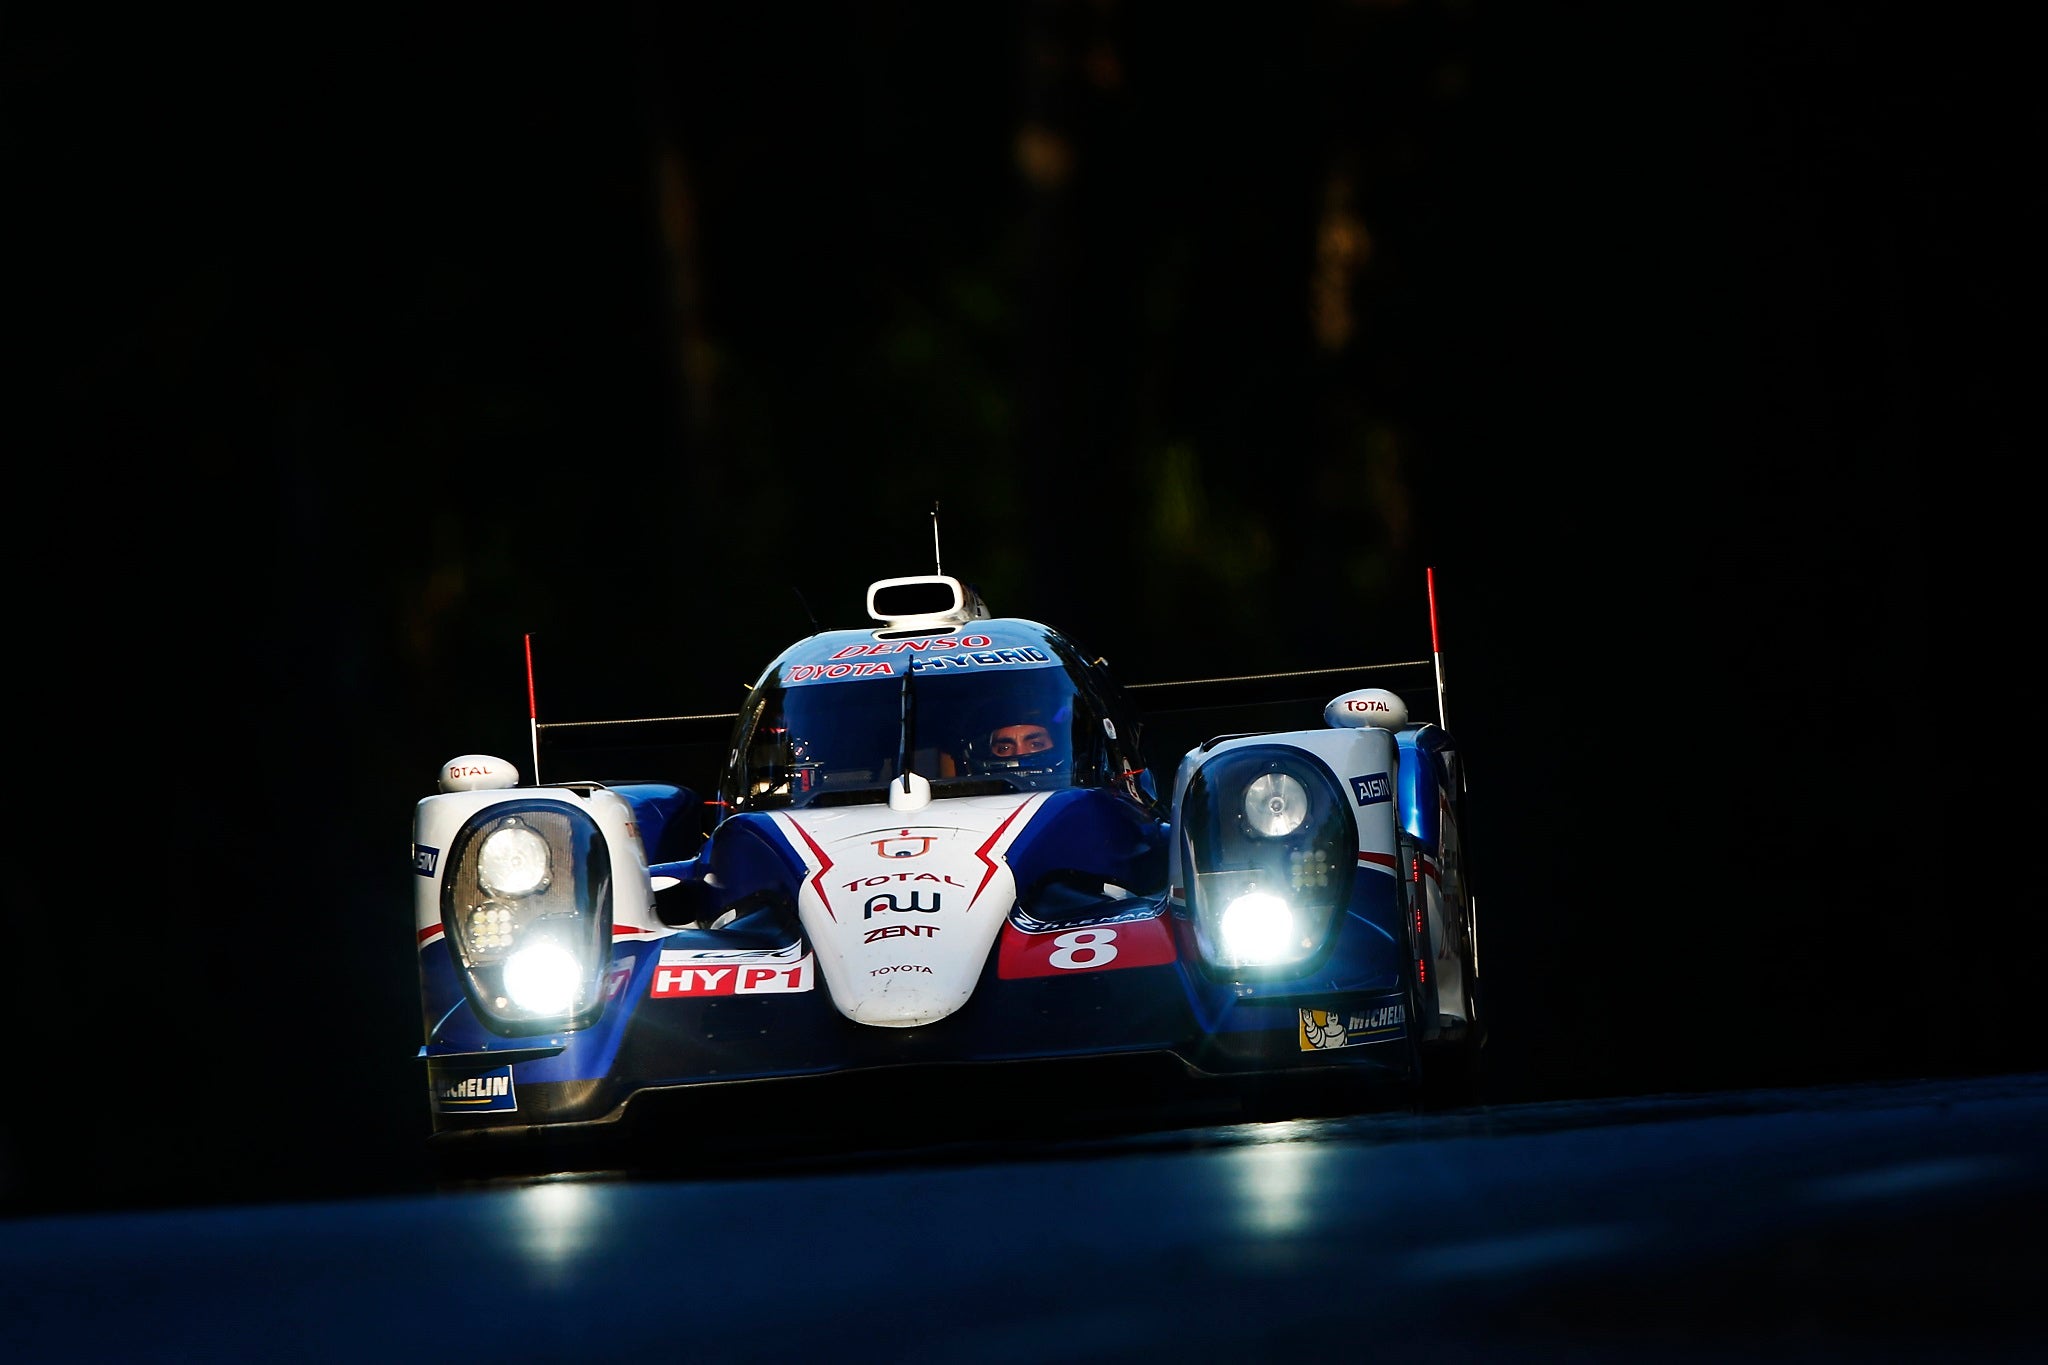 The number 7 Toyota in action at Le Mans